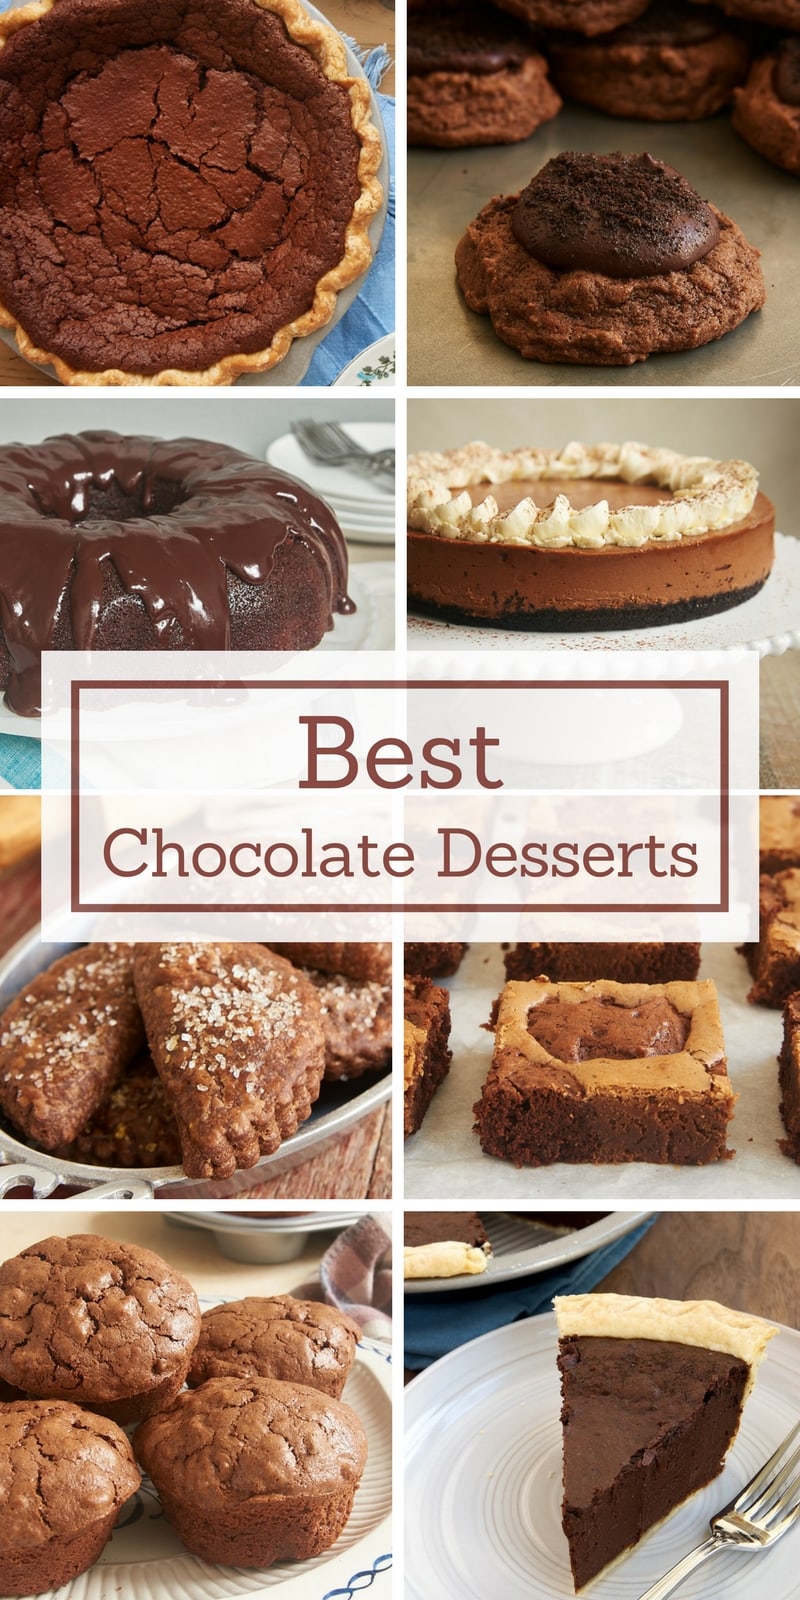 The best and most popular chocolate desserts from Bake or Break!